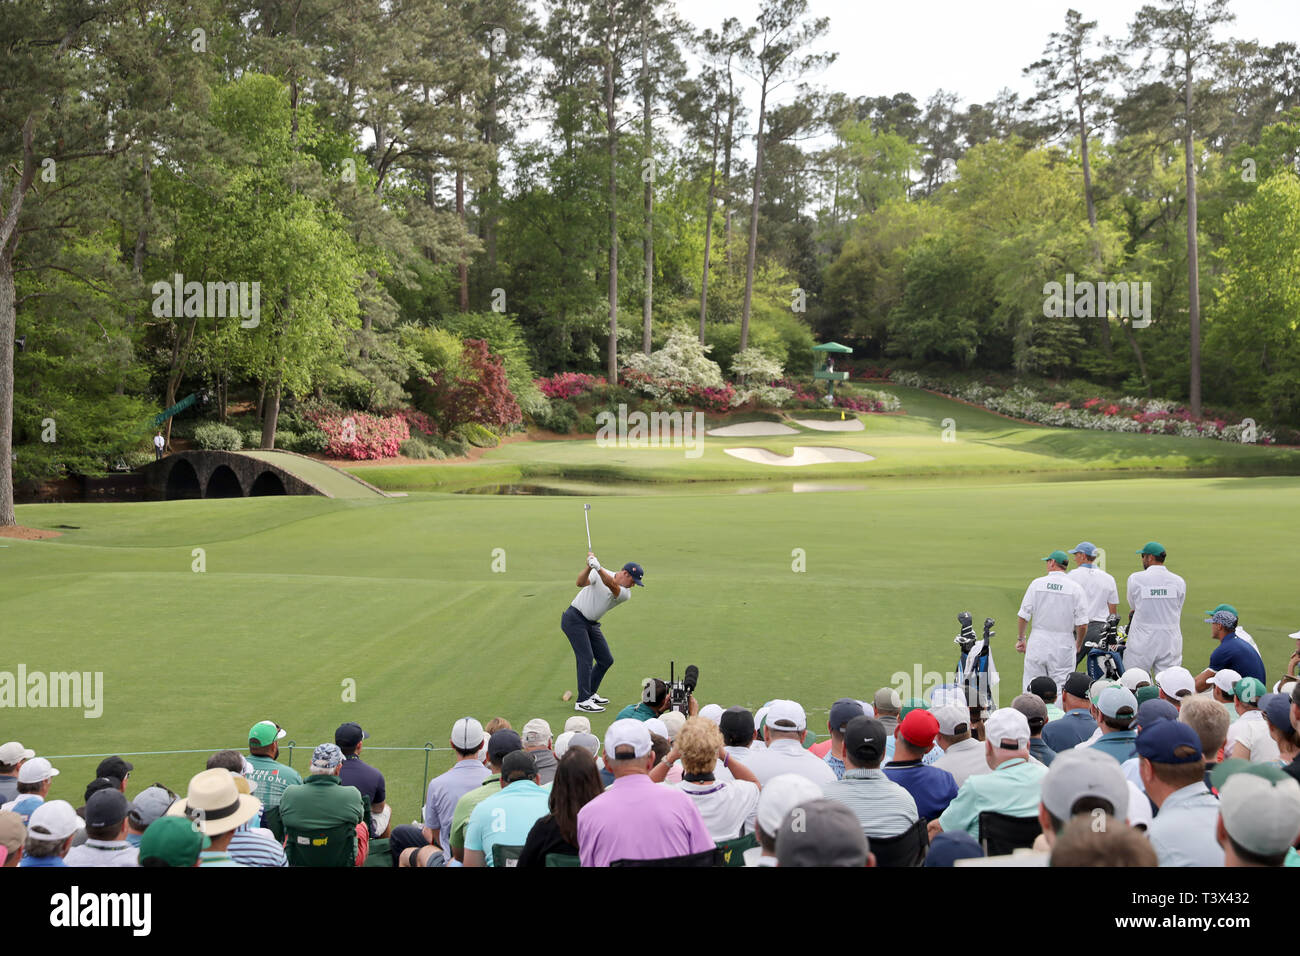 England's Paul Casey plays a shot on the 12th hole during the first round  of the 2019 Masters golf tournament at the Augusta National Golf Club in  Augusta, Georgia, United States, on